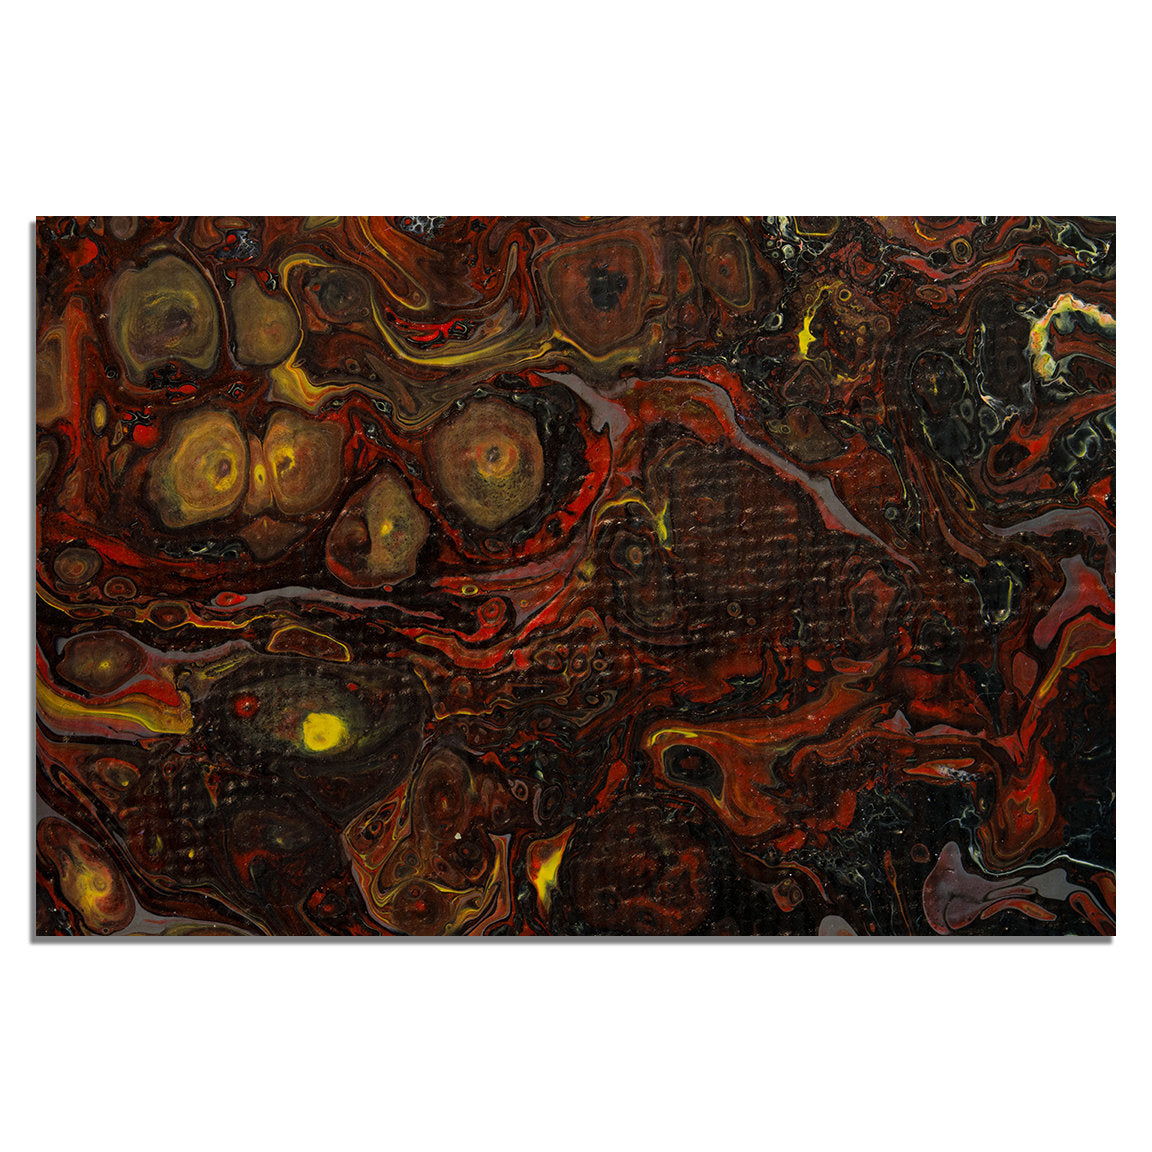 Removable Wall Mural - Wallpaper  Abstract Artwork - Fluid Art Pour 21  - PIPAFINEART